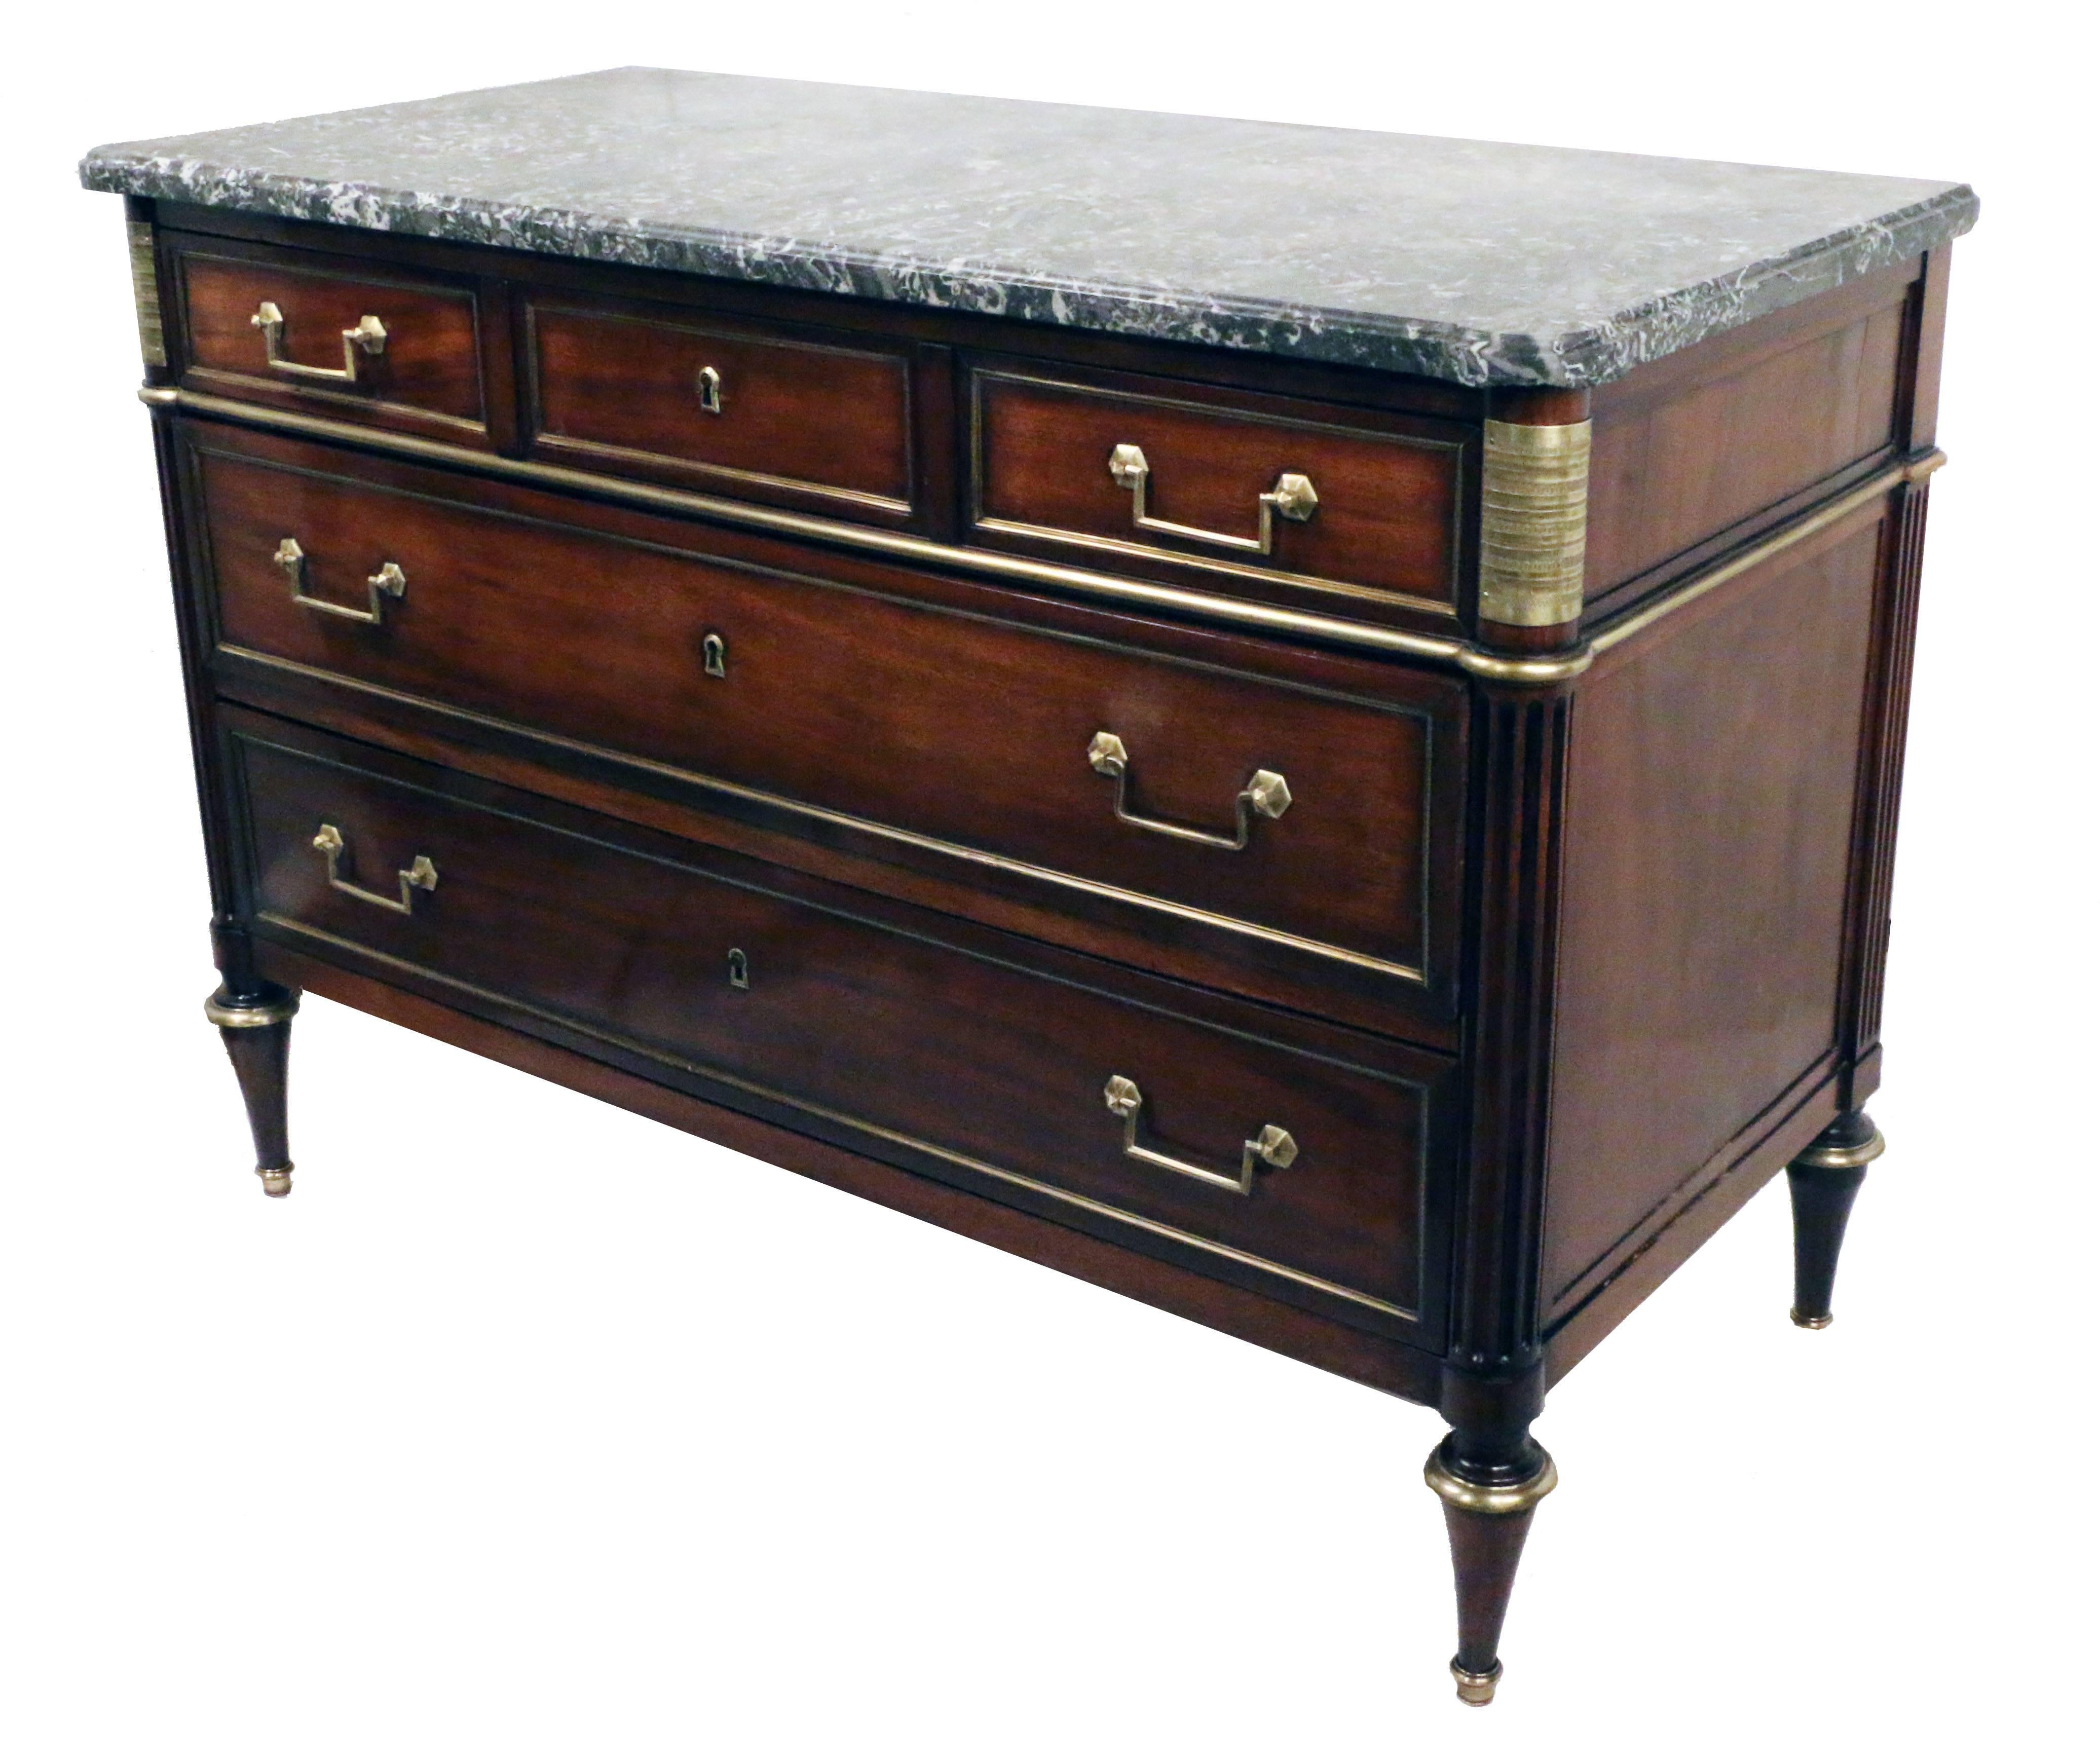 This commode is remarkable for its originality. it seems to be entirely  as it was made in the late 18th century.. The top drawer which appears to be three short  drawers is actually one long one. The beveled St Anne marble top is original too. The